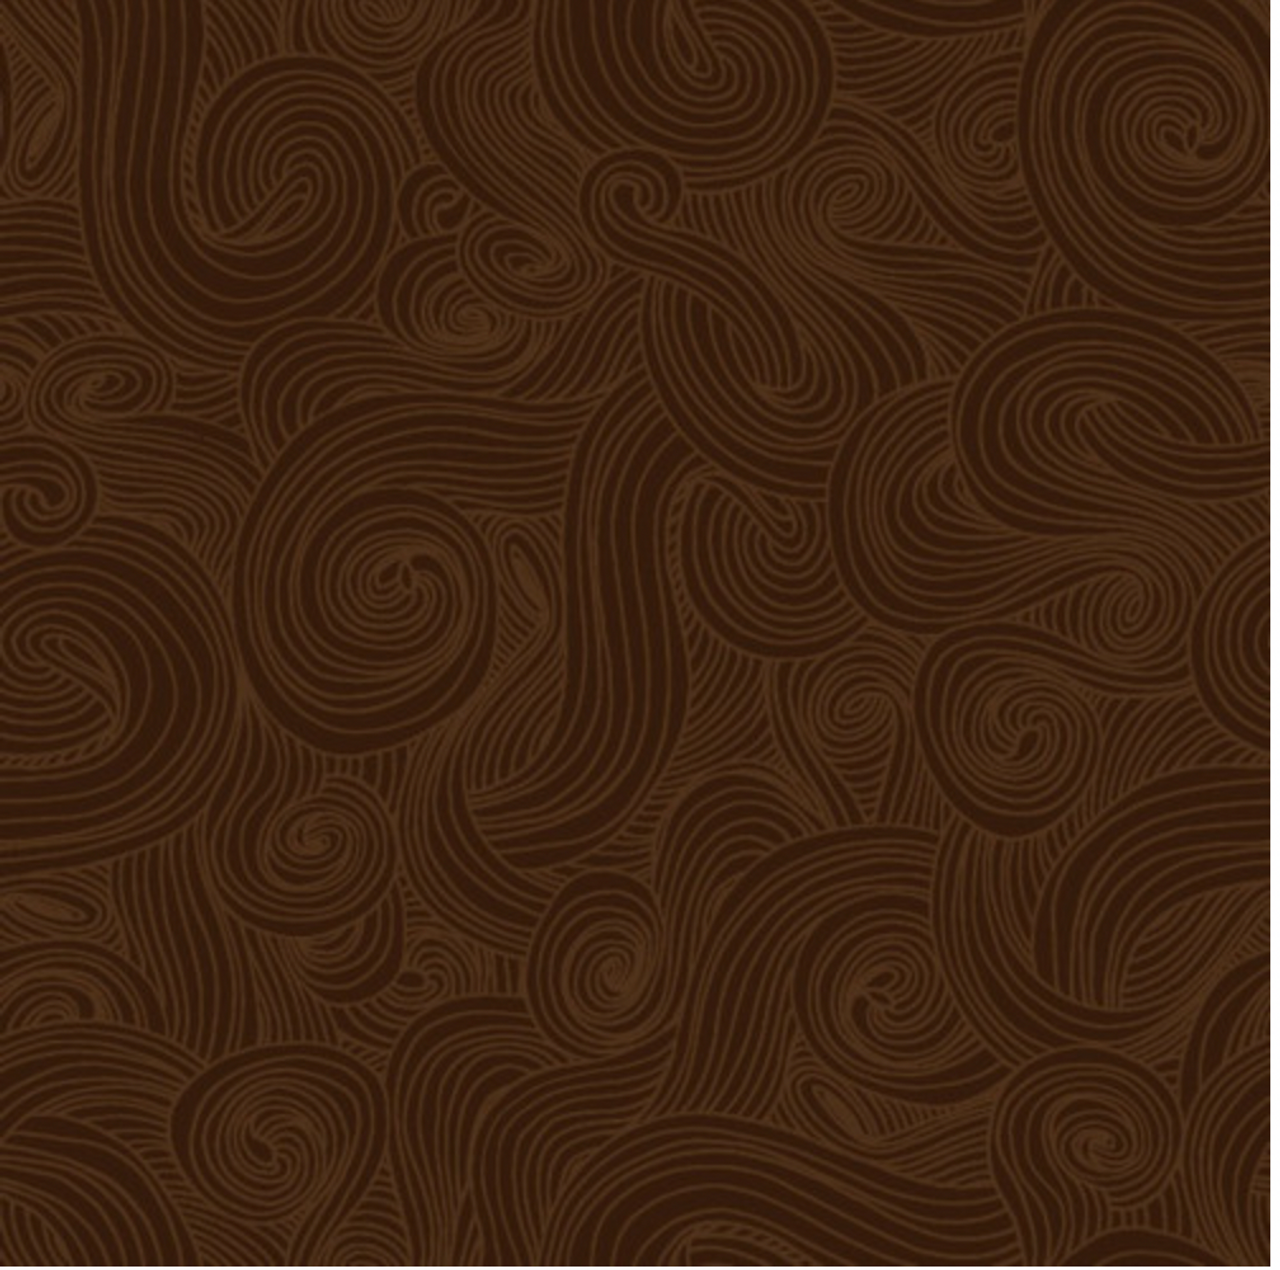 Studio E Just Color! Swirl Brown Cotton Fabric By The Yard